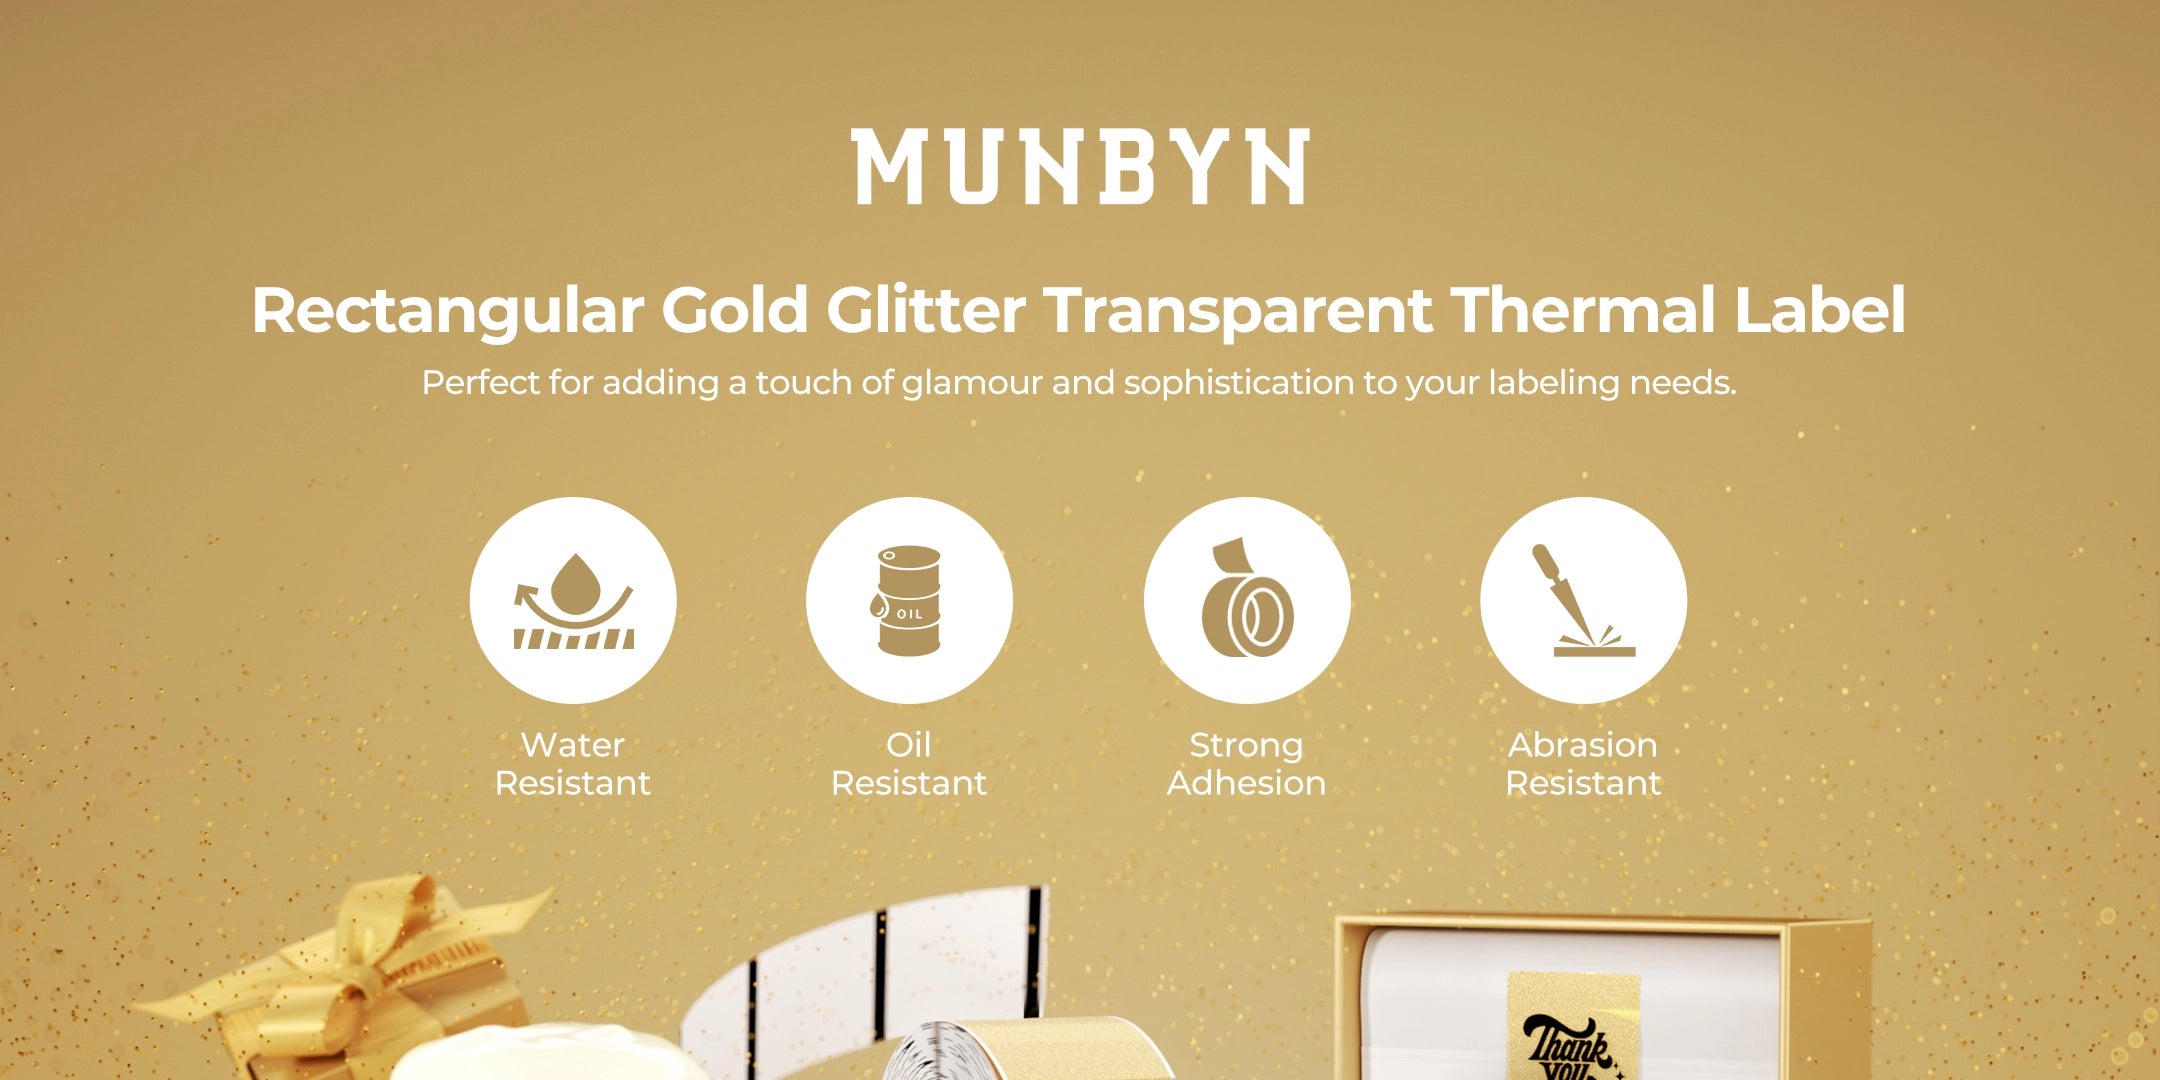 MUNBYN gold glitter thermal labels